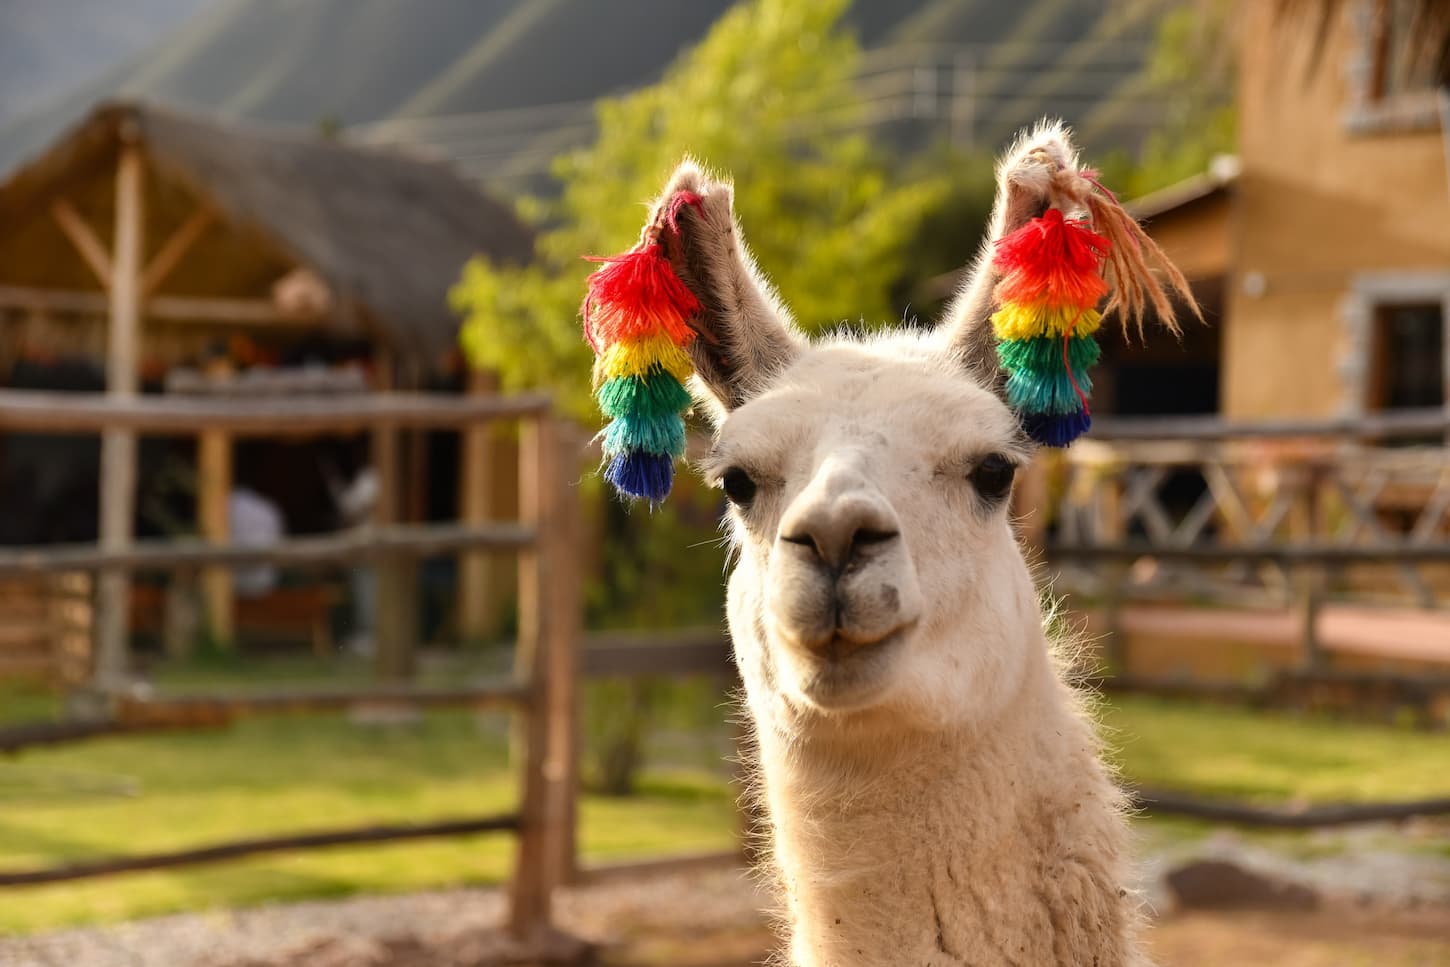 An image of an alpaca with adorned ears looking at the camera for a photo.